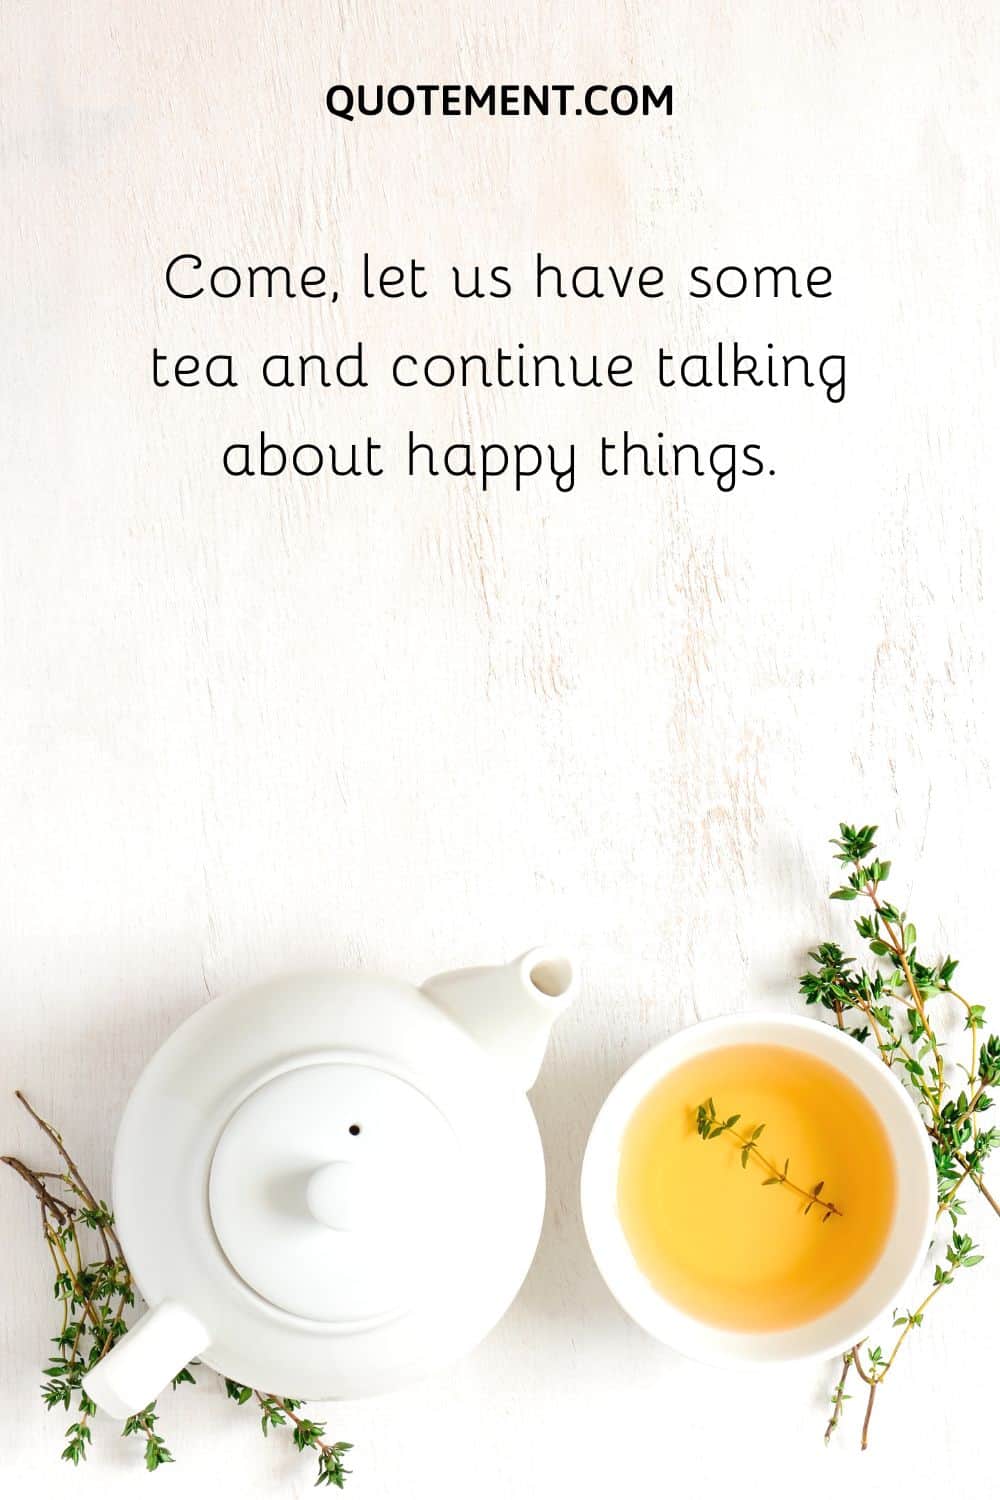 Come, let us have some tea and continue talking about happy things.